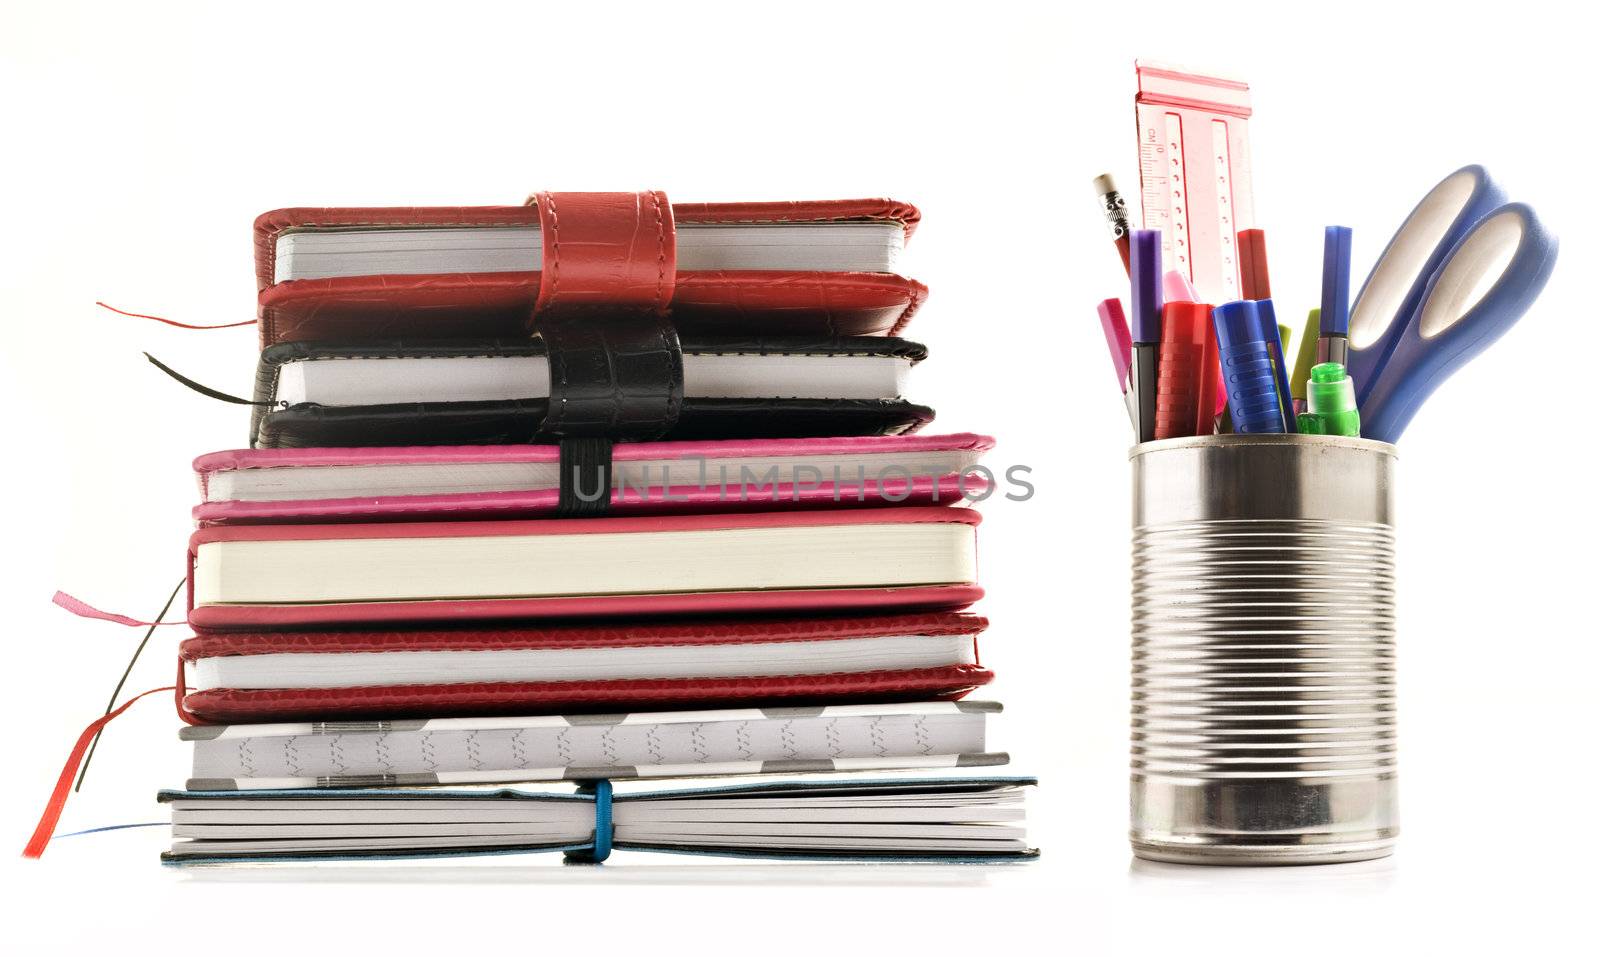 Stationery and books on white background with space for text